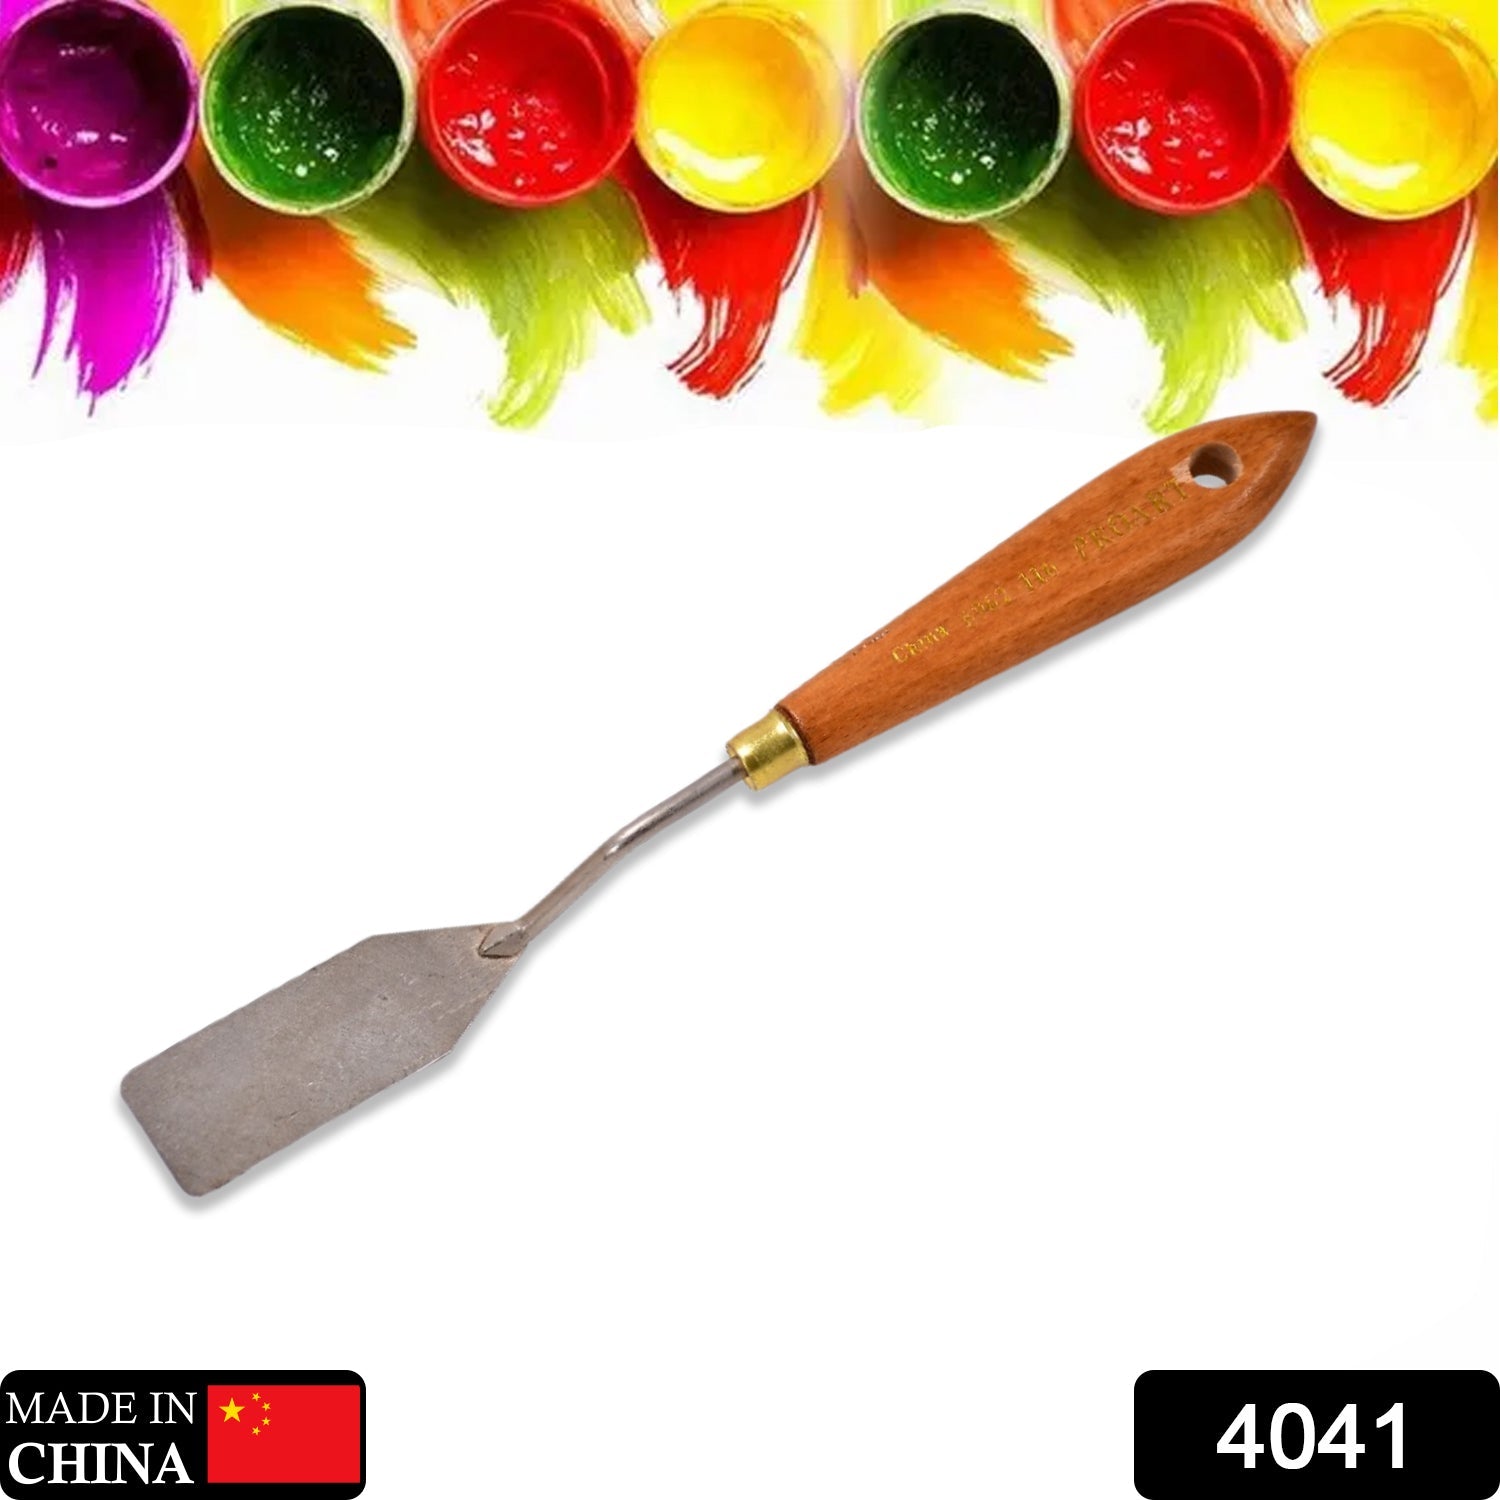 4041 Stainless Steel Artists Palette Knife, Spatula Palette Knife Paint Mixing Scraper, Thin and Flexible Art Tools for Oil Painting, Acrylic Mixing, Etc 